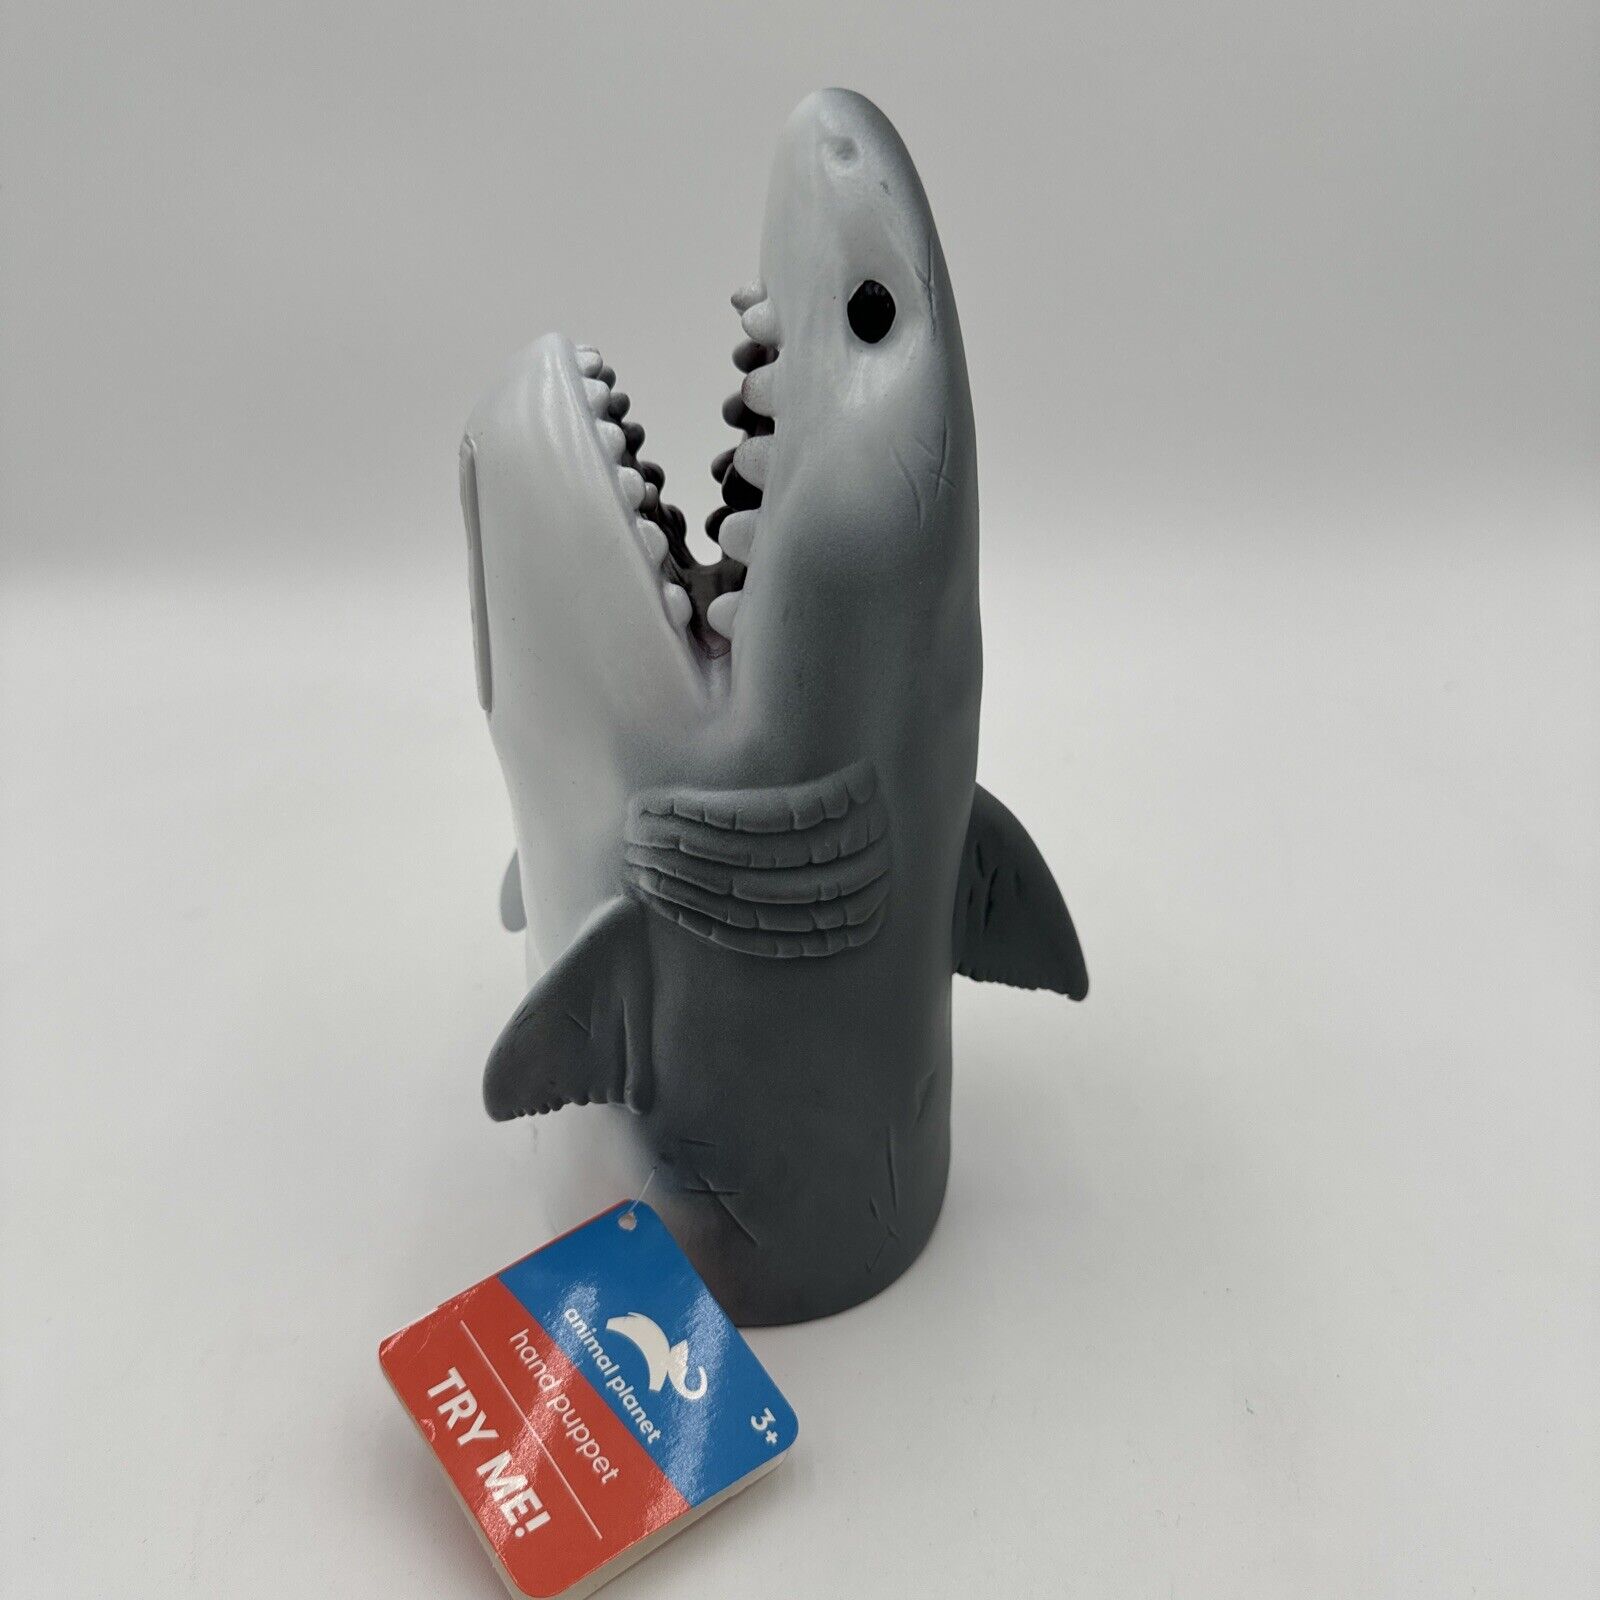 Animal Planet Shark Sound Hand Puppet 2022 Blip 022123 (TESTED/WORKING) (NEW)